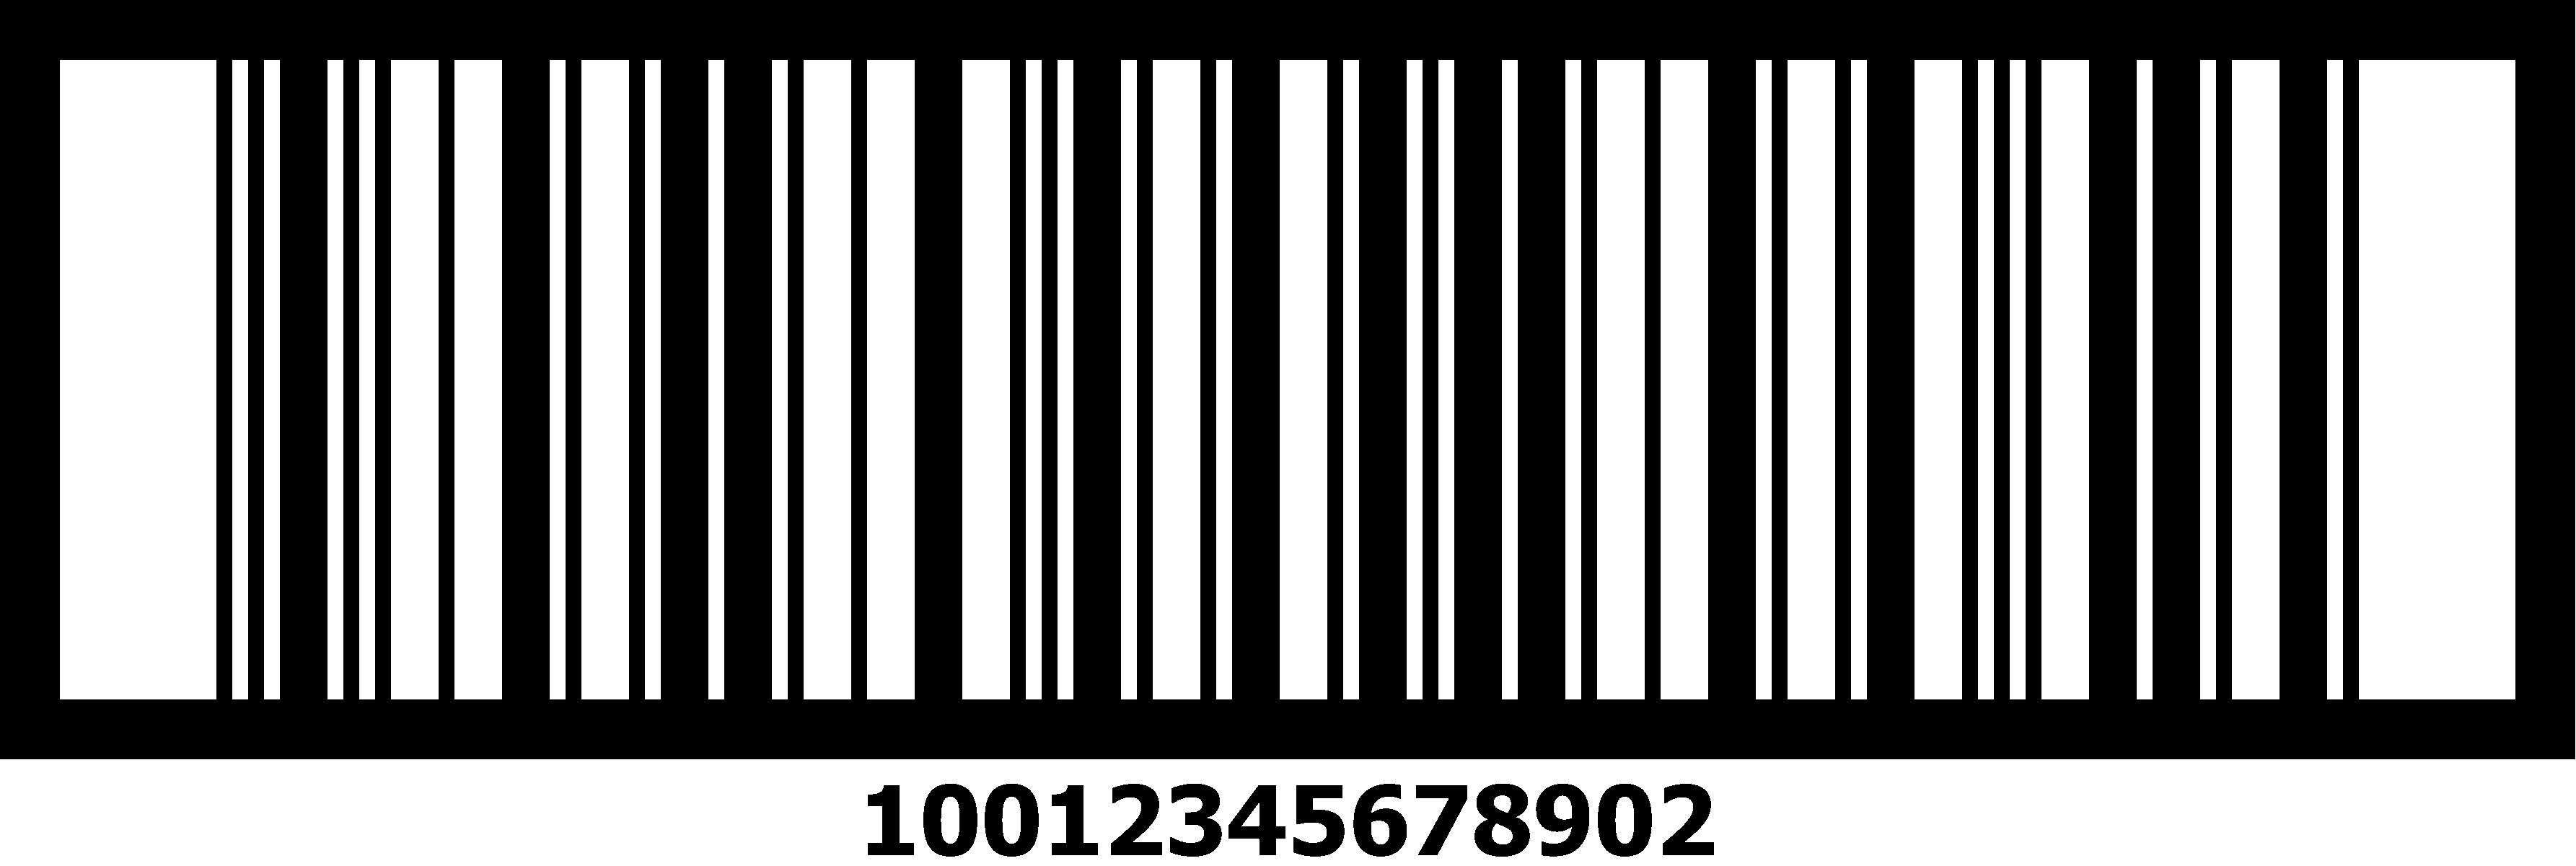 Shipping Container Barcodes Gtin 14